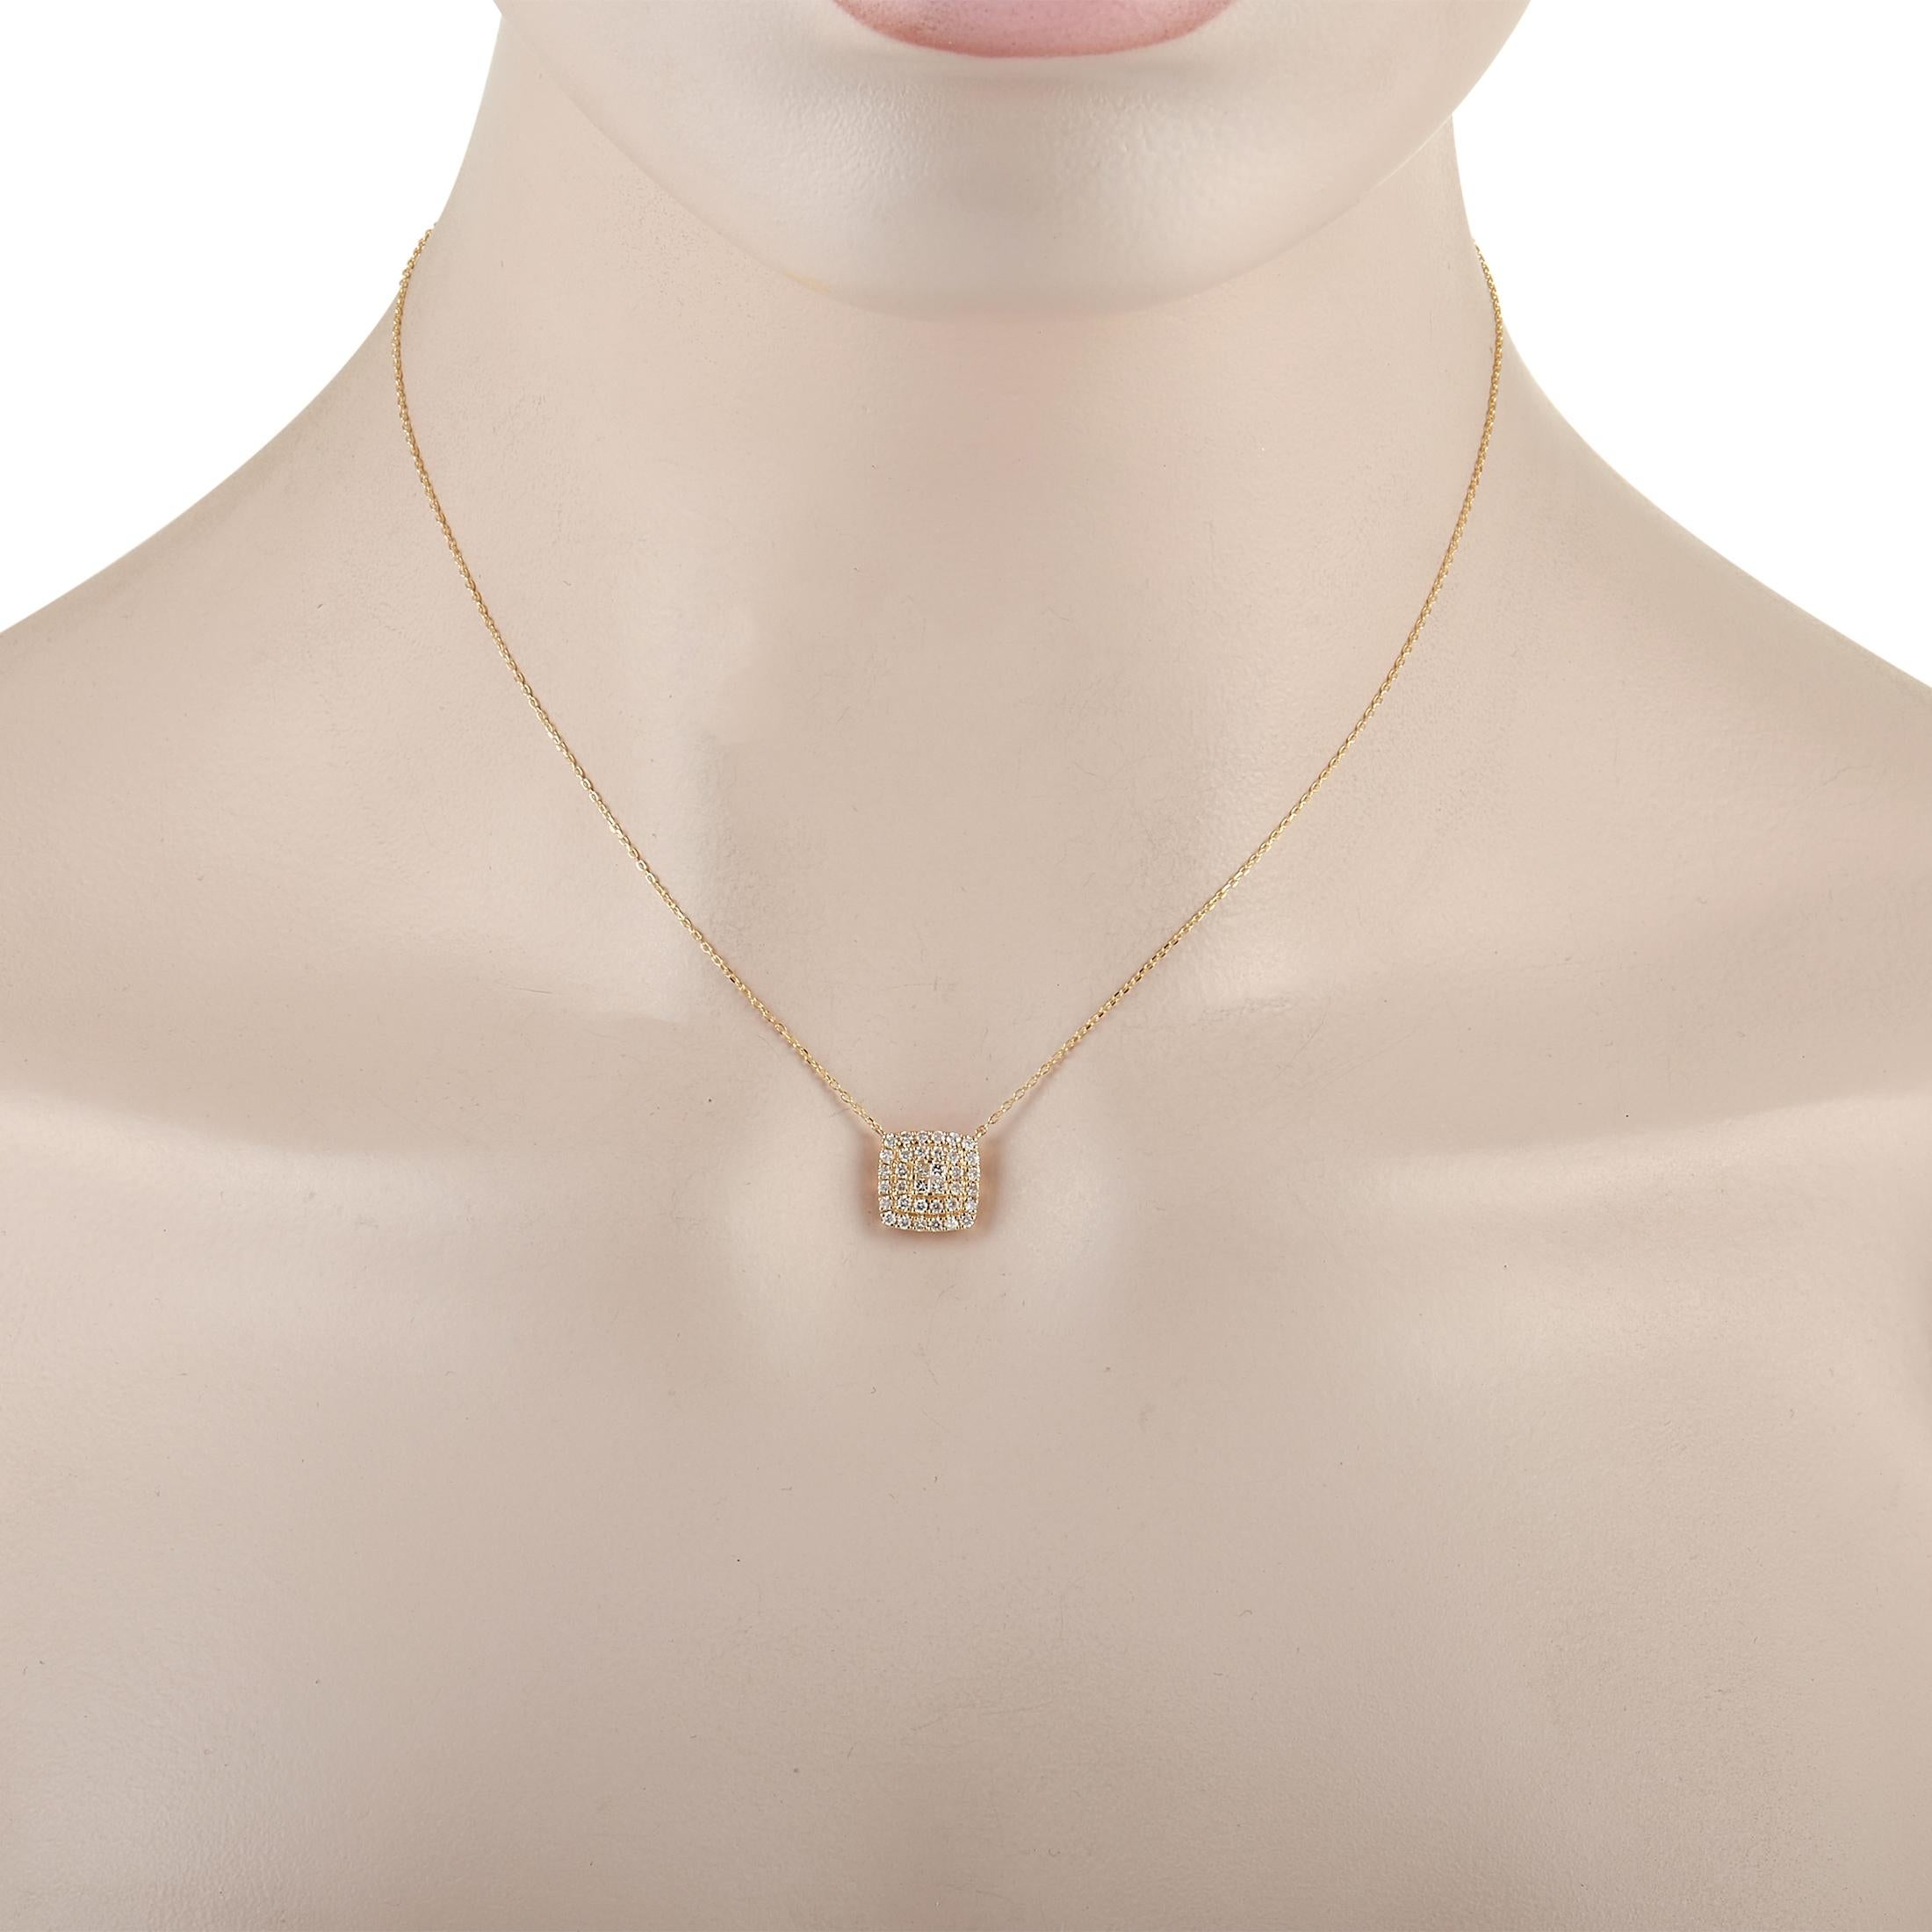 This opulent pendant necklace is poised to elevate any ensemble it’s paired with. A square pendant encrusted with glittering diamonds totaling 0.50 carats makes this piece truly come alive. Radiant gemstones also contrast beautifully against the 14K